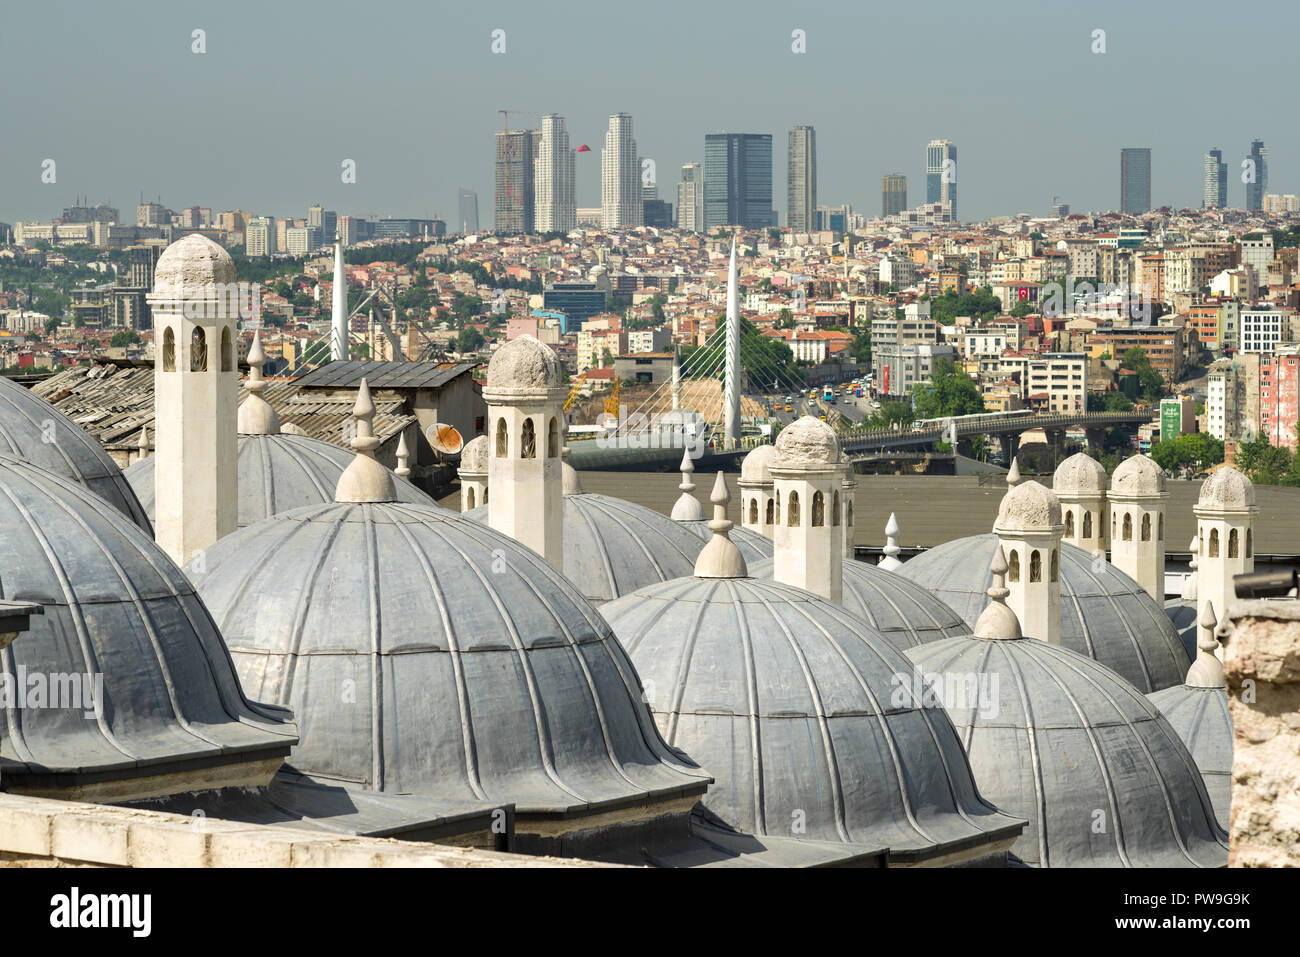 Stone chimneys of domed buildings with Golden Horn Metro Bridge in background, Istanbul, Turkey Stock Photo